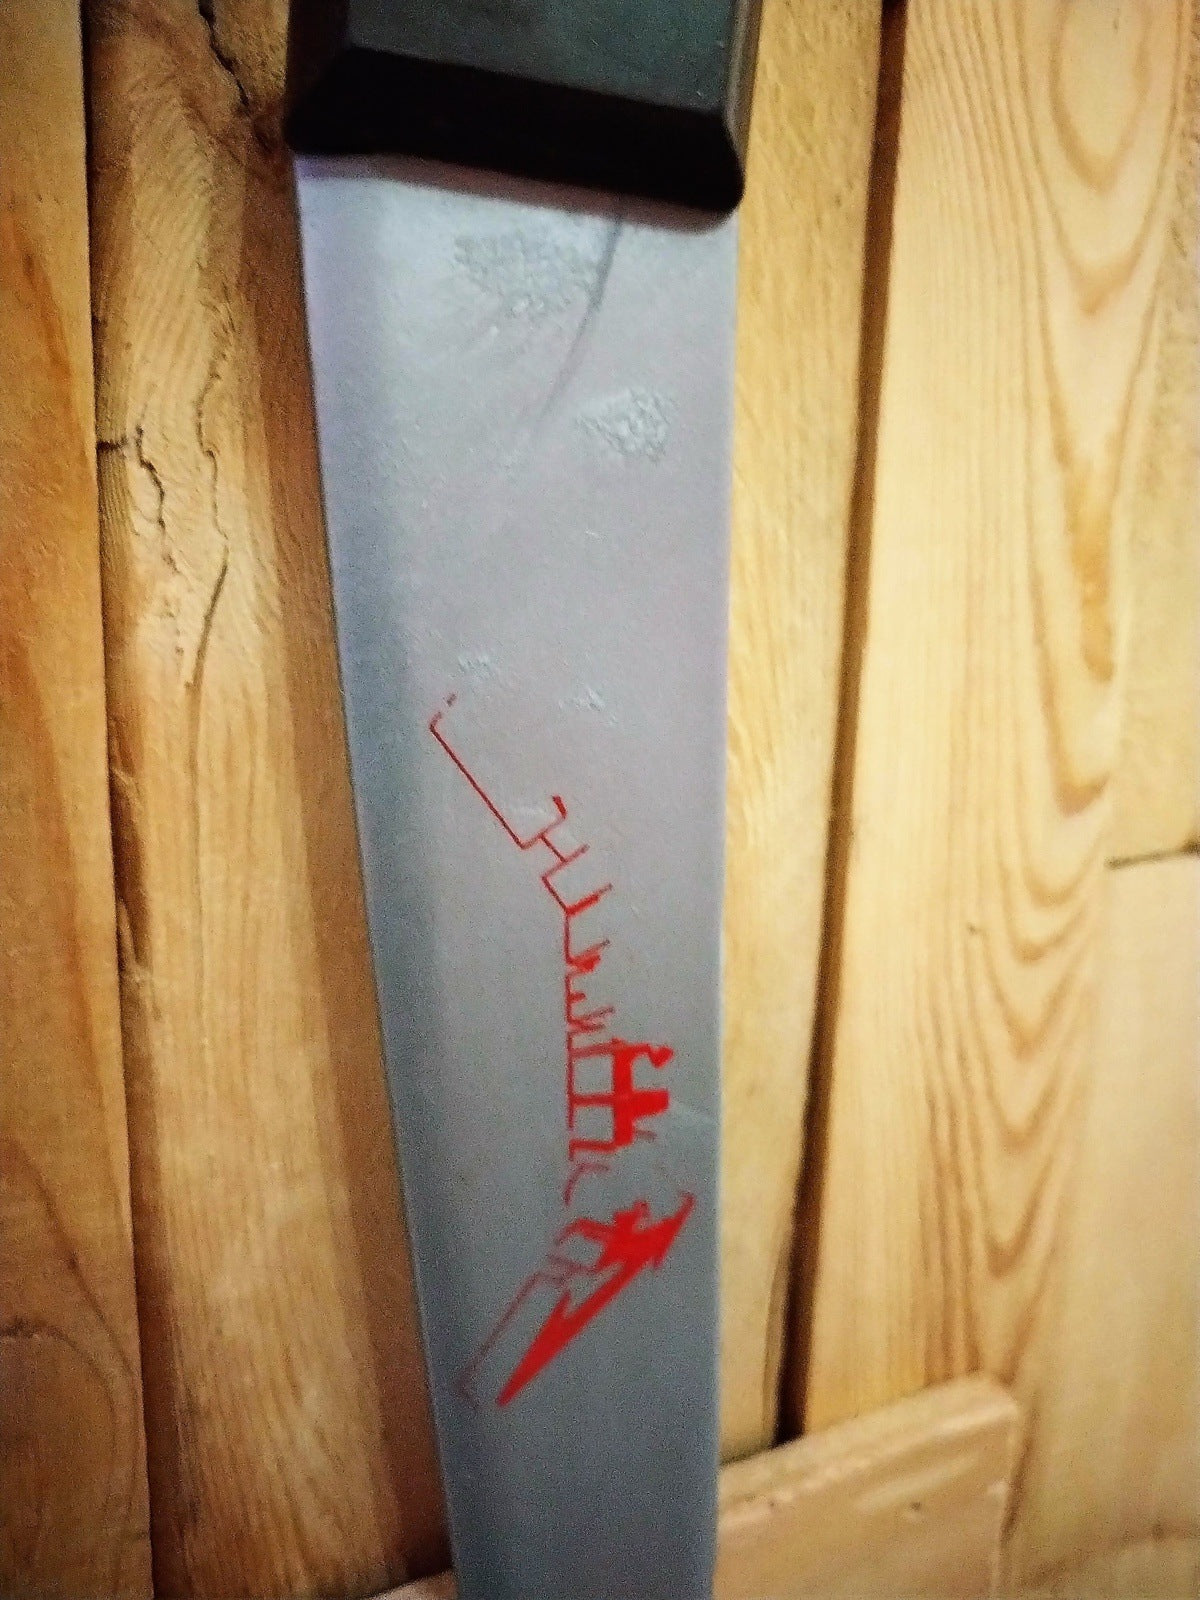 Metallica Electra Promotional Rubber Knife